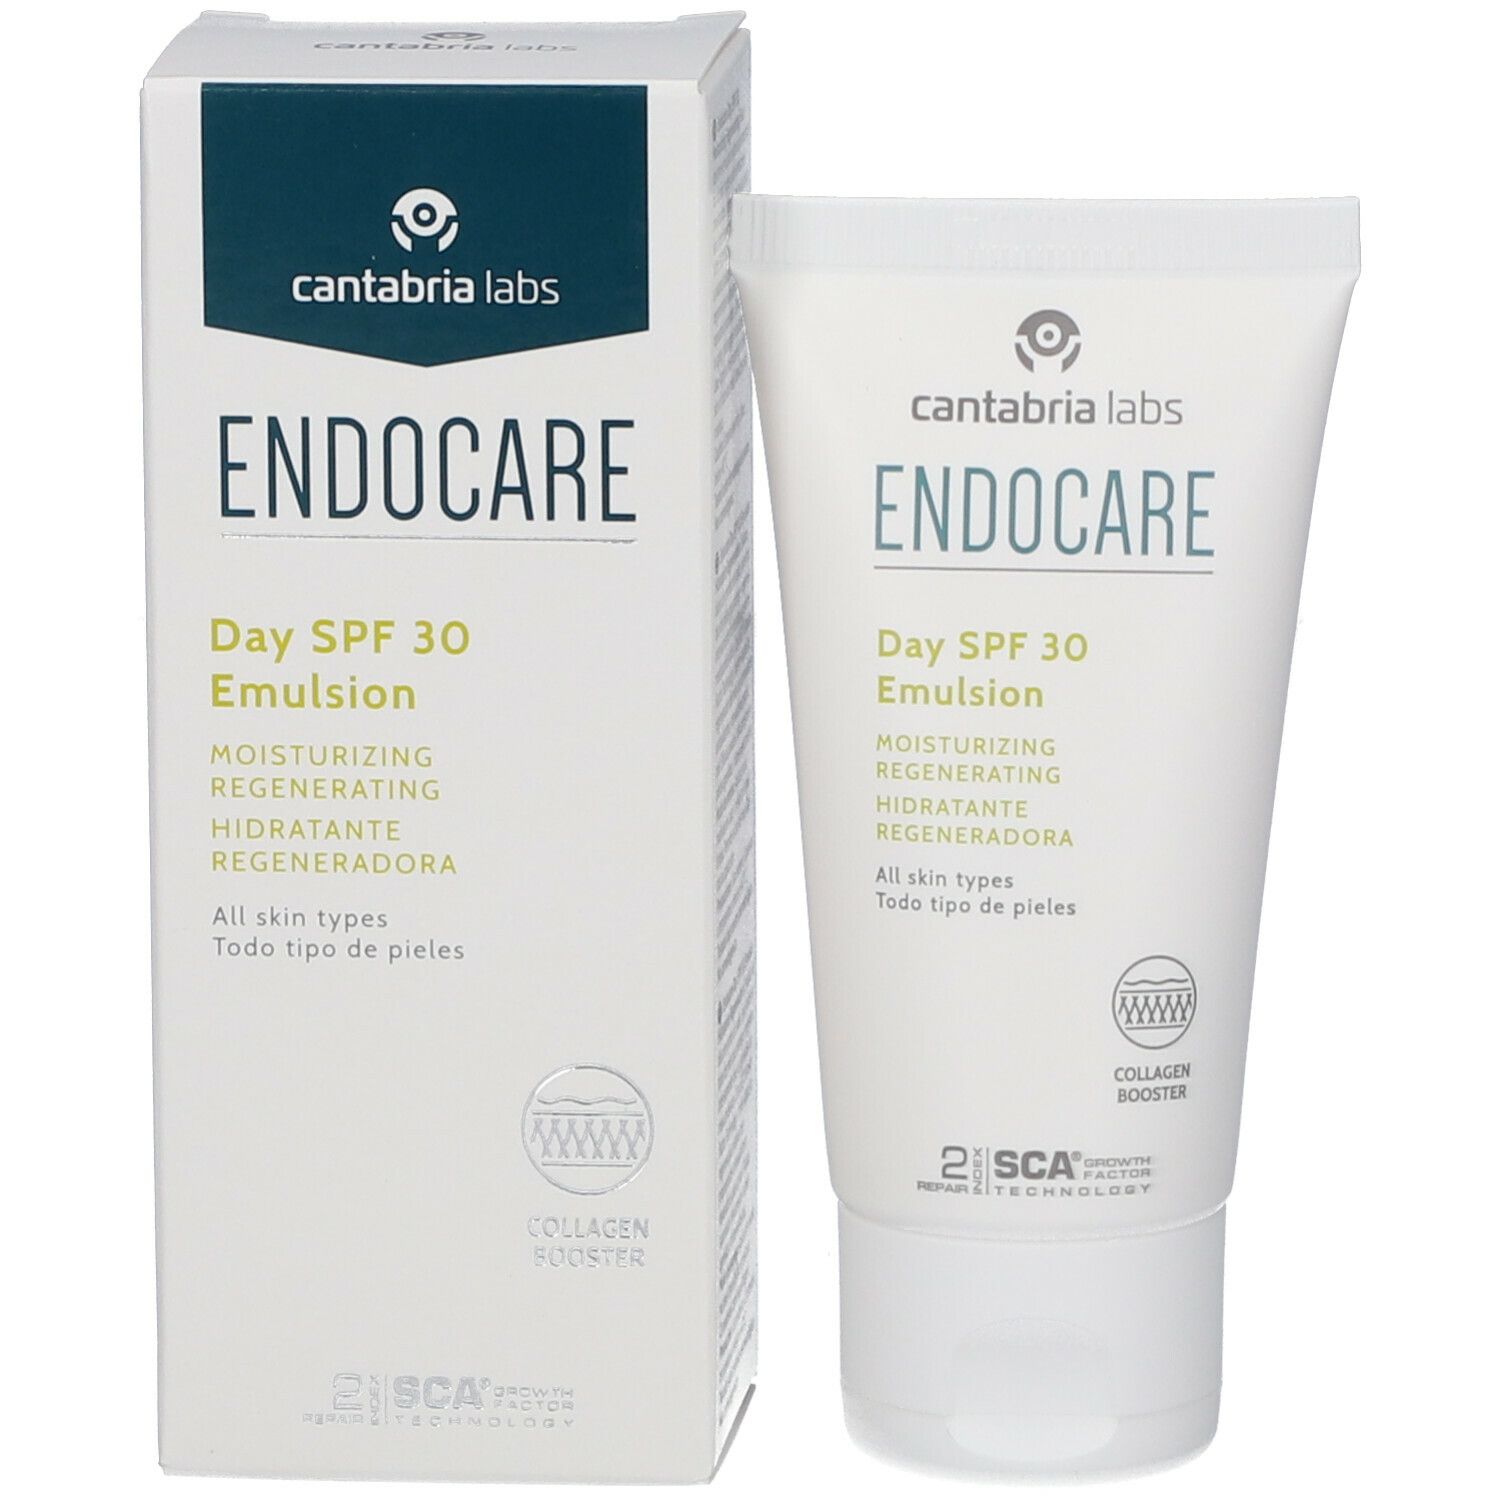 Cantabria Labs Endocare Day SPF 30